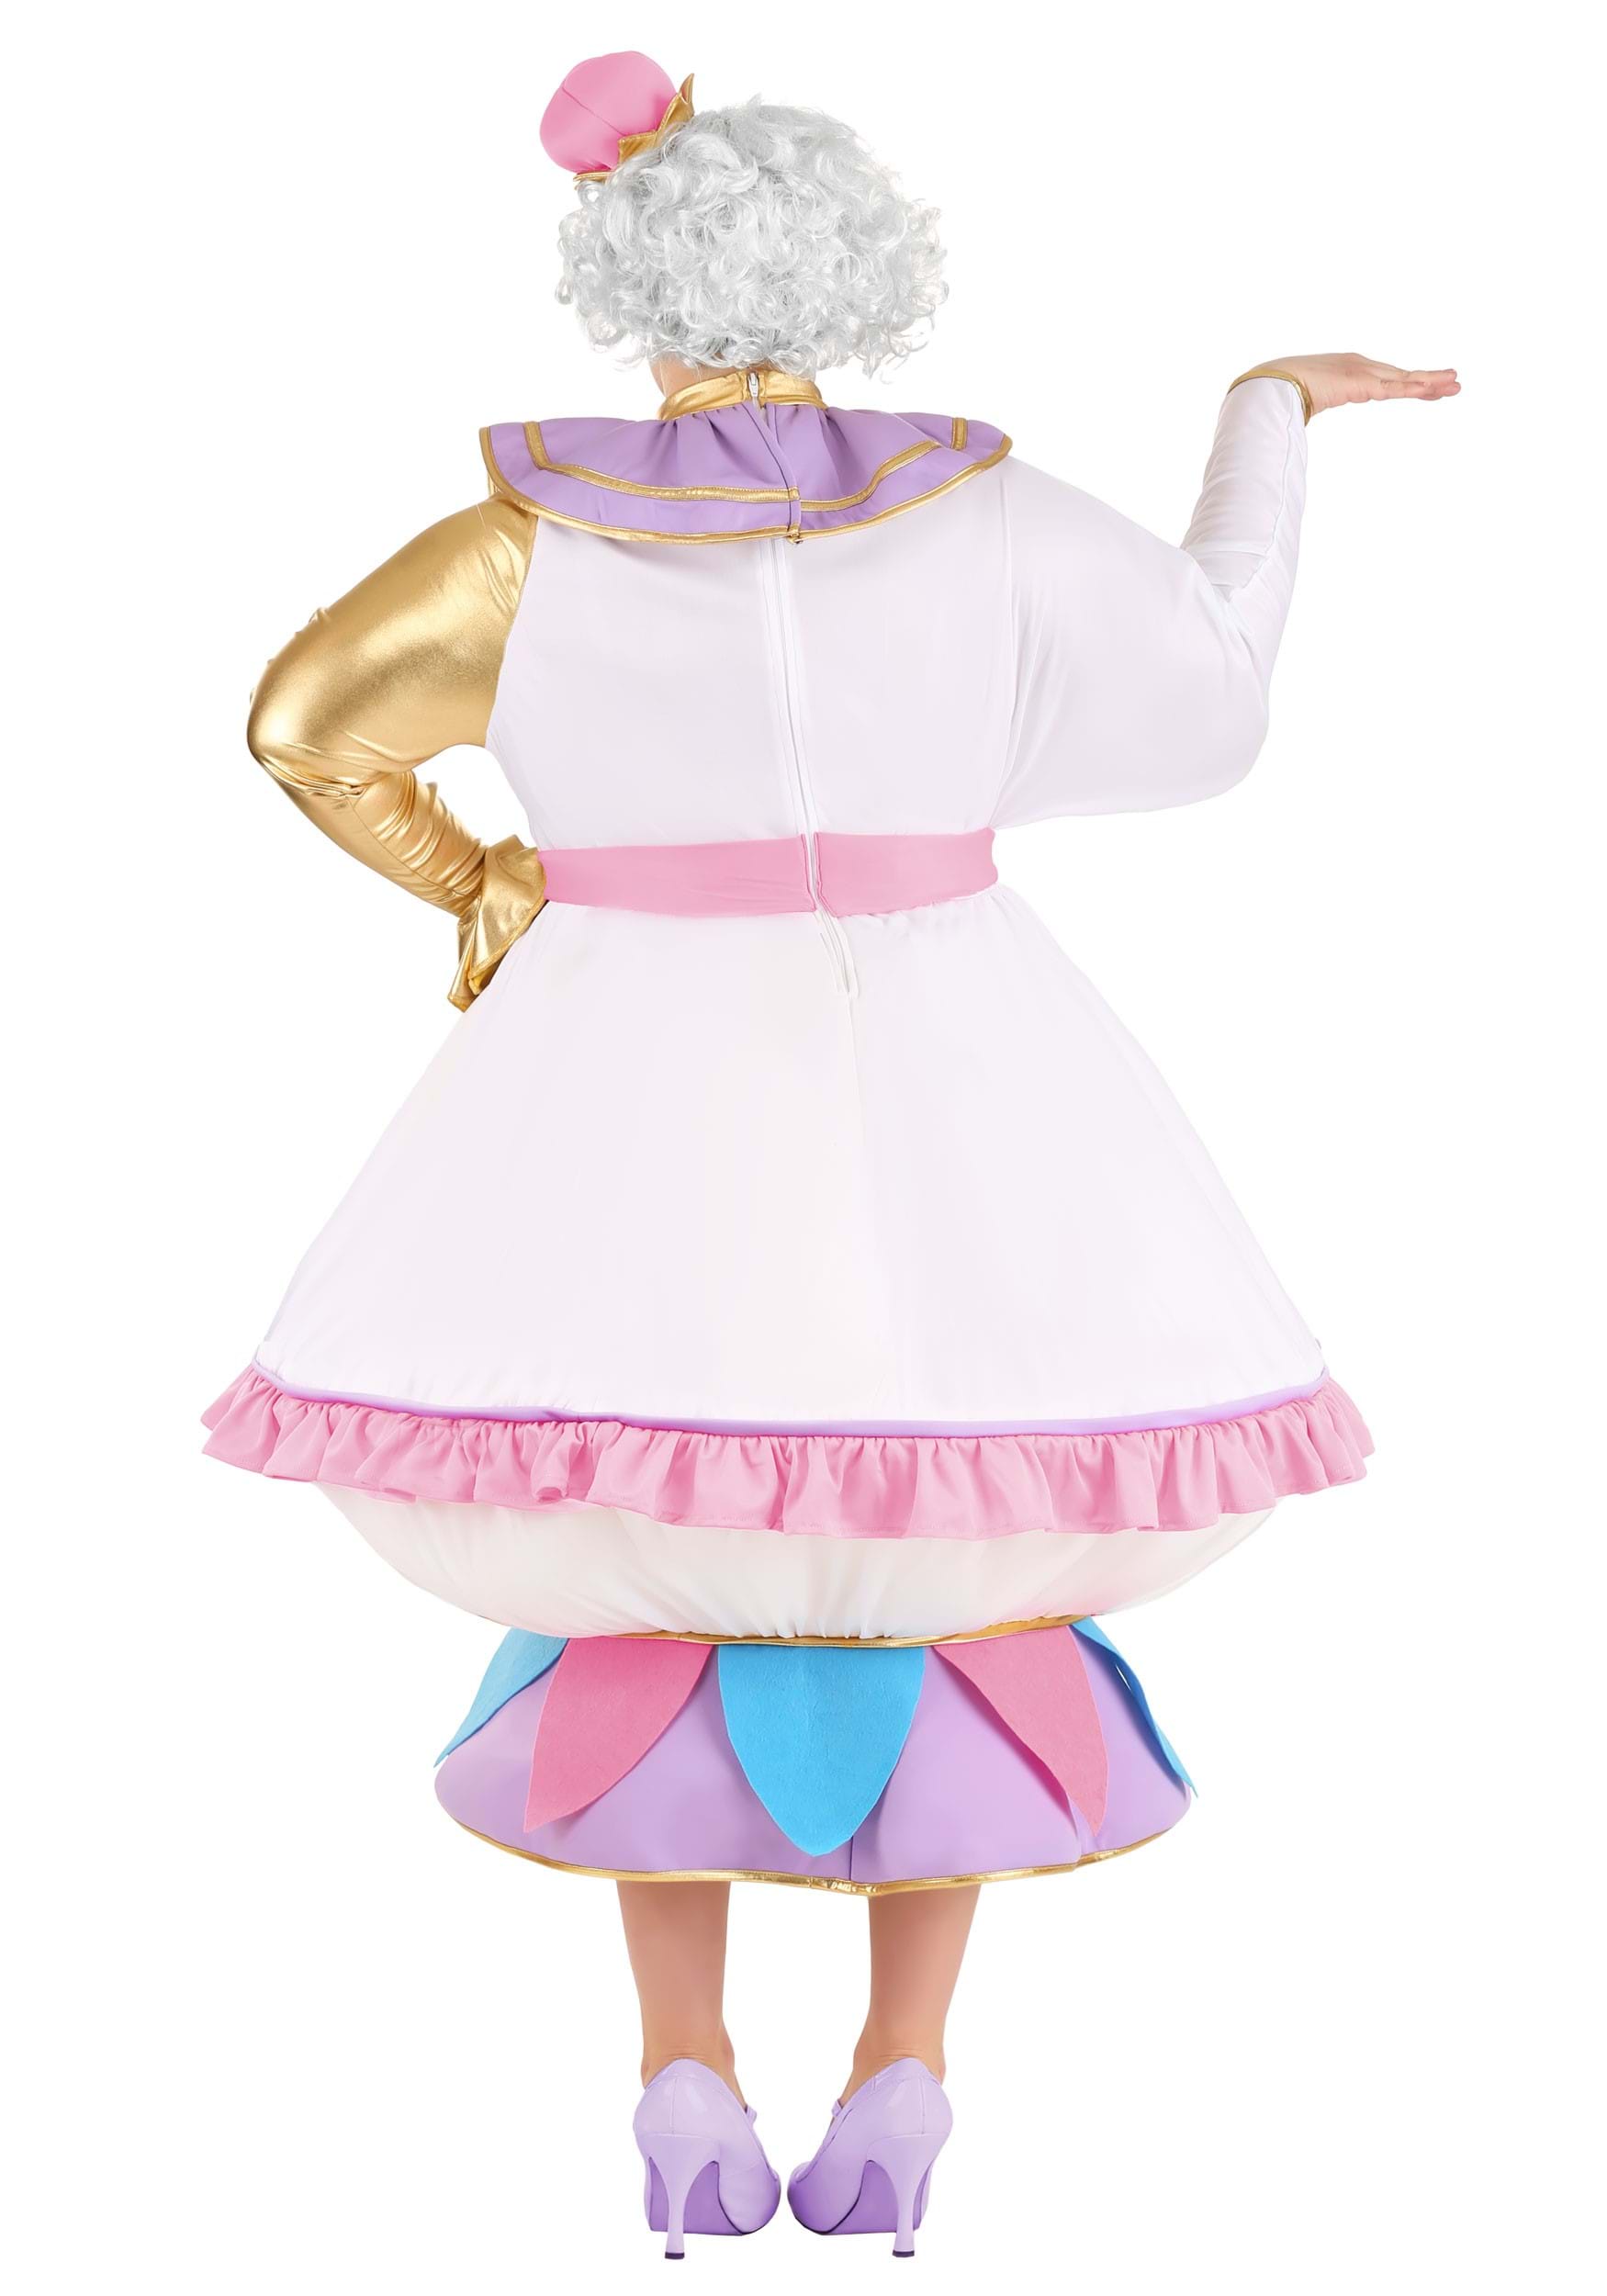 Beauty And The Beast Mrs. Potts Plus Size Costume For Women